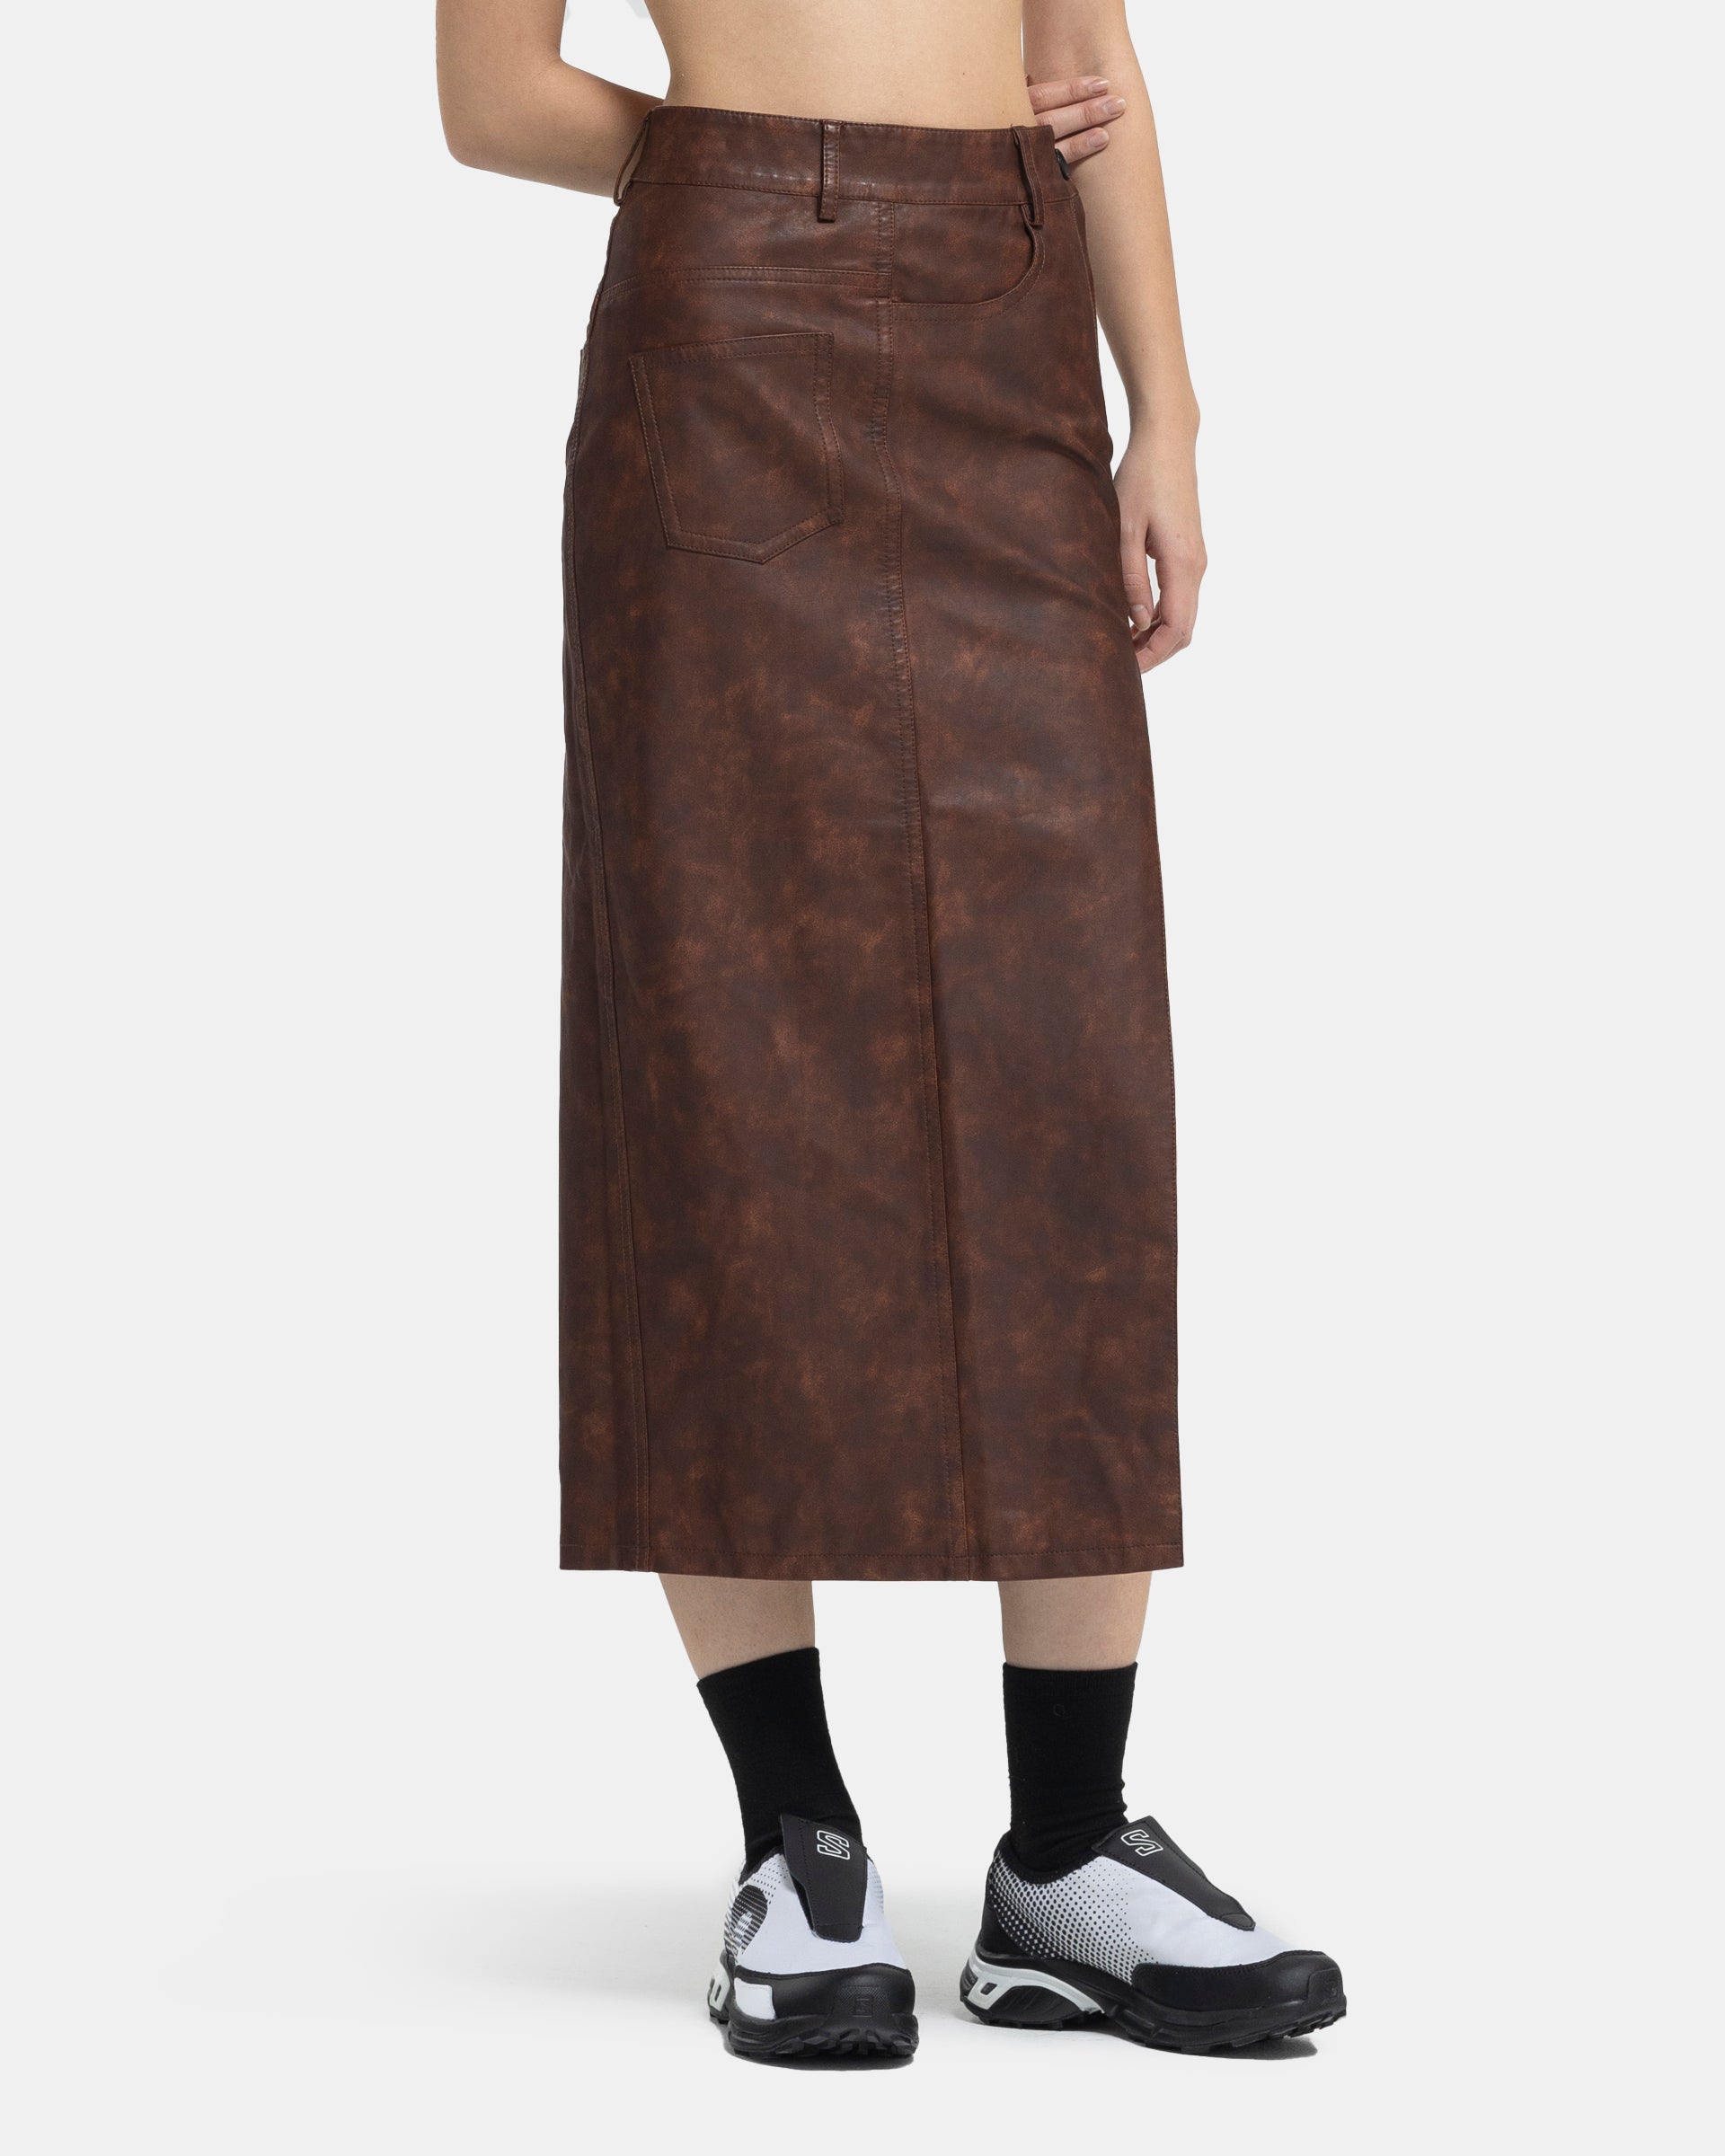 Asymmetric Washed Leather Skirt in Burgundy